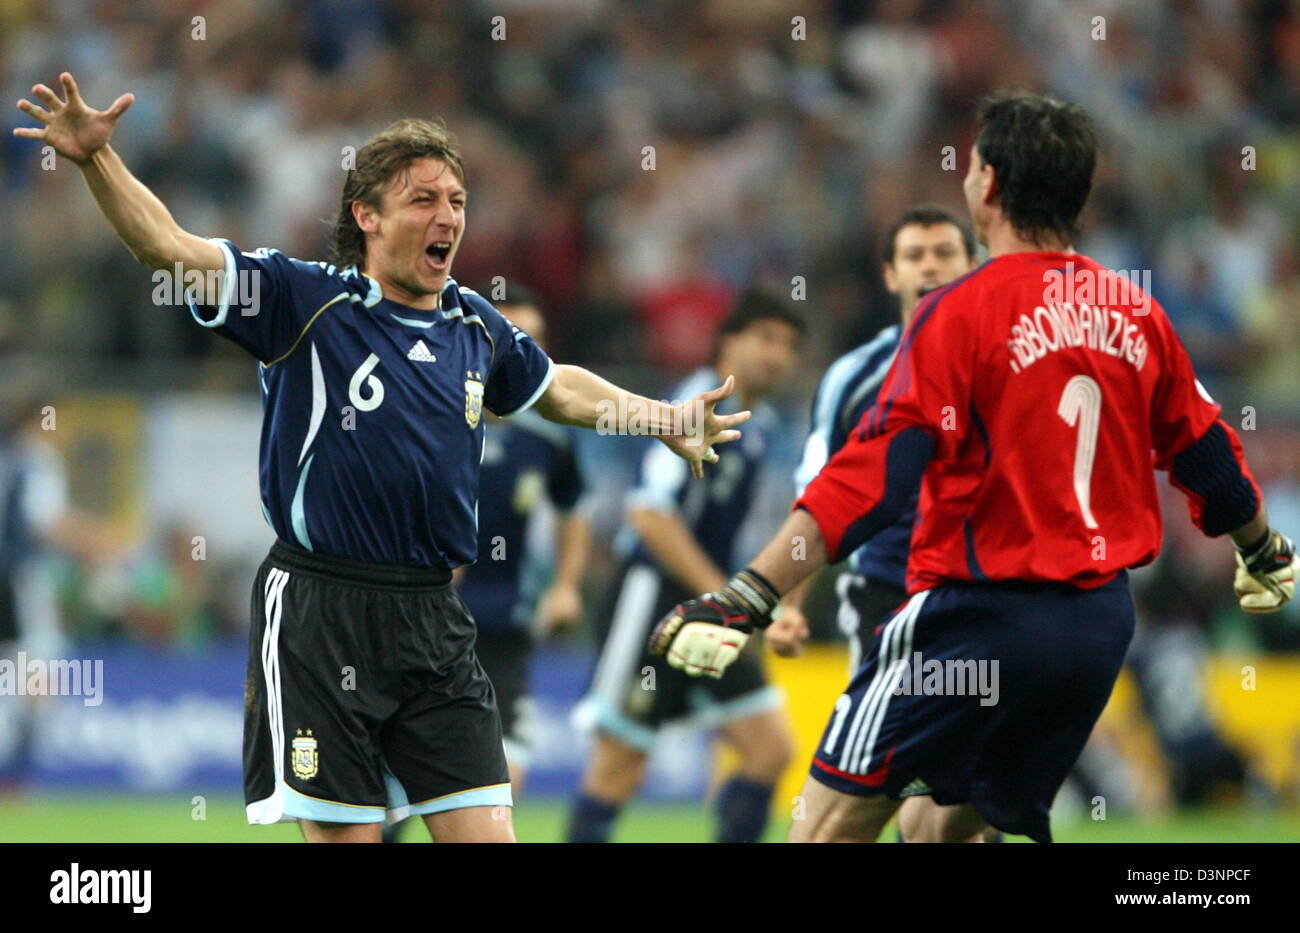 Argentinian Player Gabriel Heinze (L) celebrates with goalkeeper Roberto Abbondanzieri after his team scored the 1:0 lead agaist Serbia and Montenegro during the group C match of 2006 FIFA World Cup between Argentina and Serbia and Montenegro in Gelsenkirchen on Friday, 16 June, 2006. DPA/ROLAND WEIHRAUCH +++ Mobile Services OUT +++ Please refer to FIFA's Terms and Conditions Stock Photo